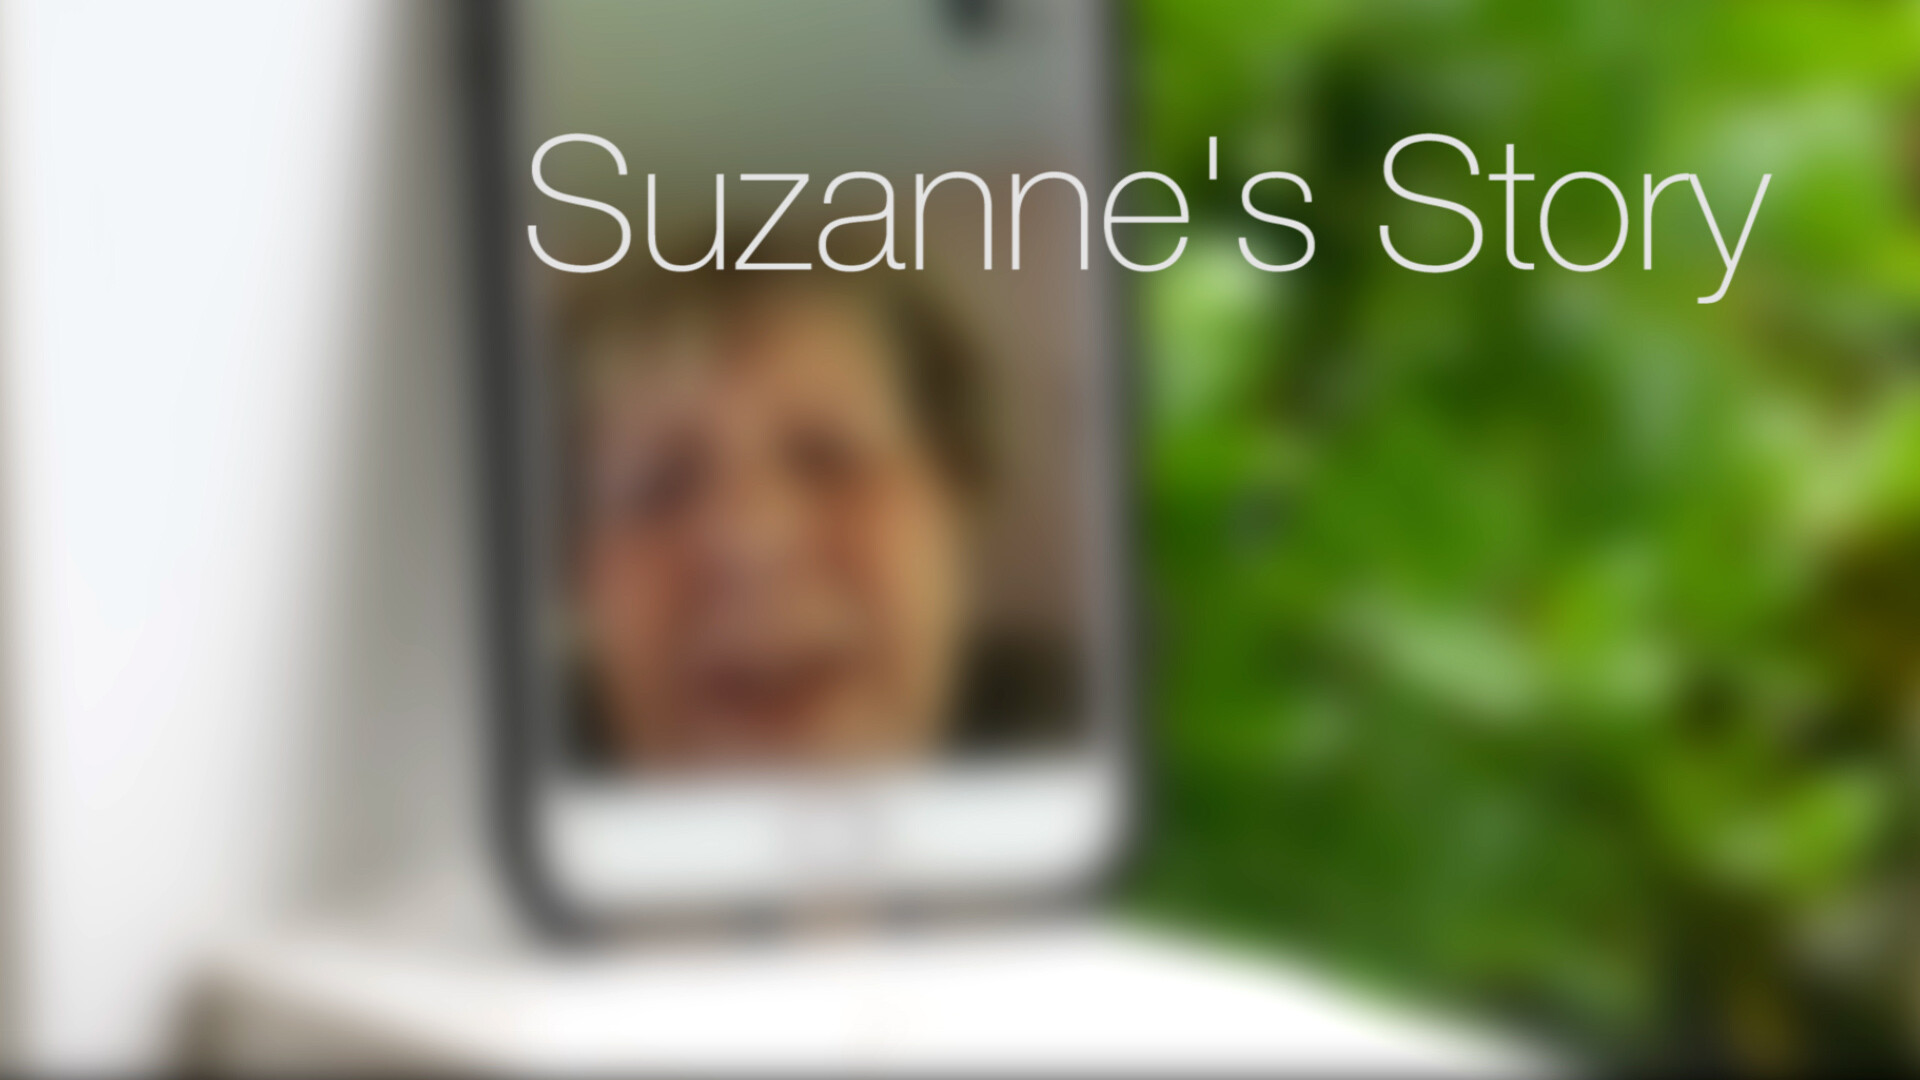 Suzanne's Story